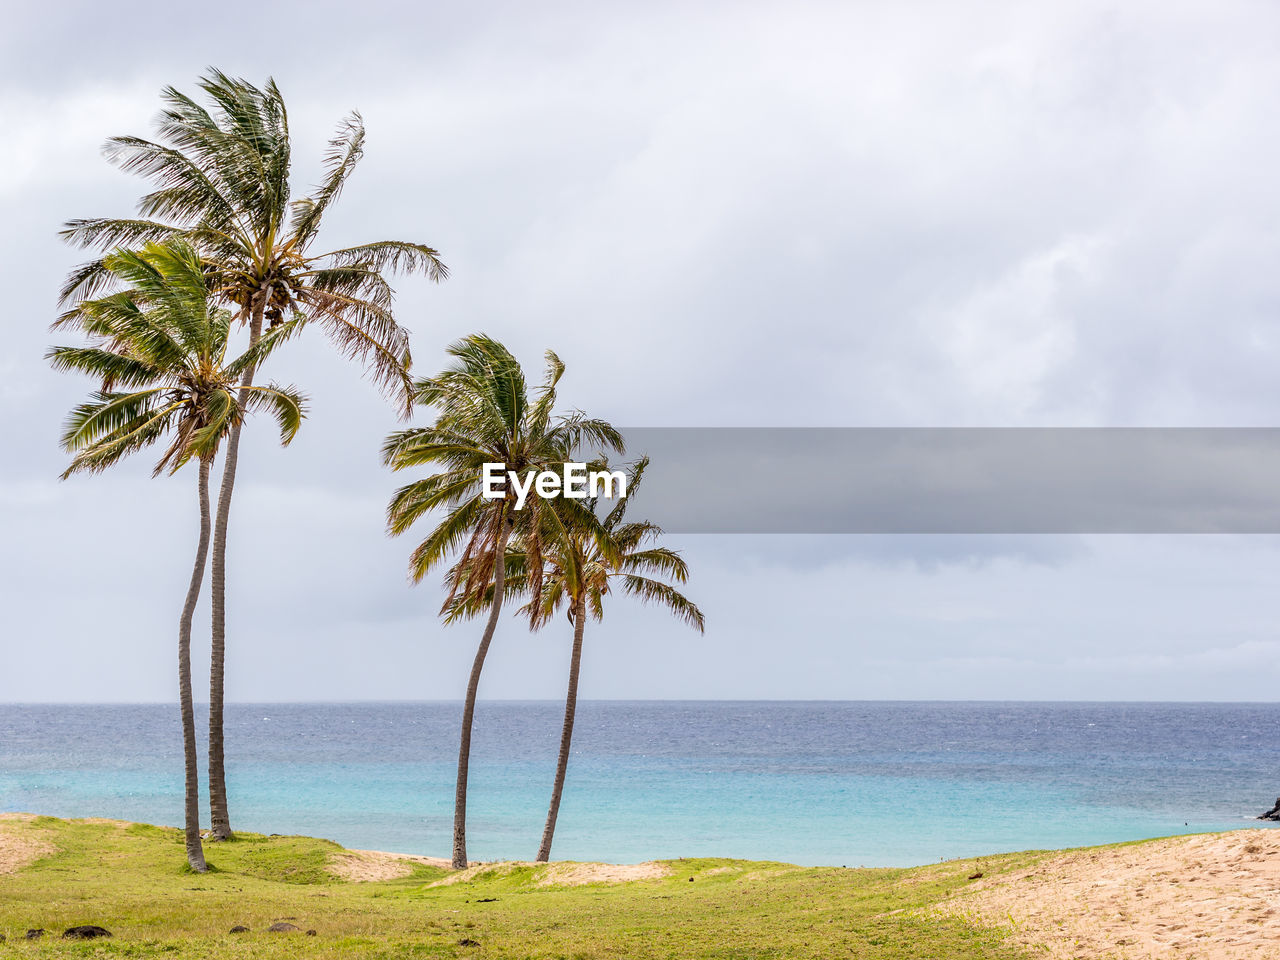 SCENIC VIEW OF PALM TREE ON BEACH AGAINST SKY